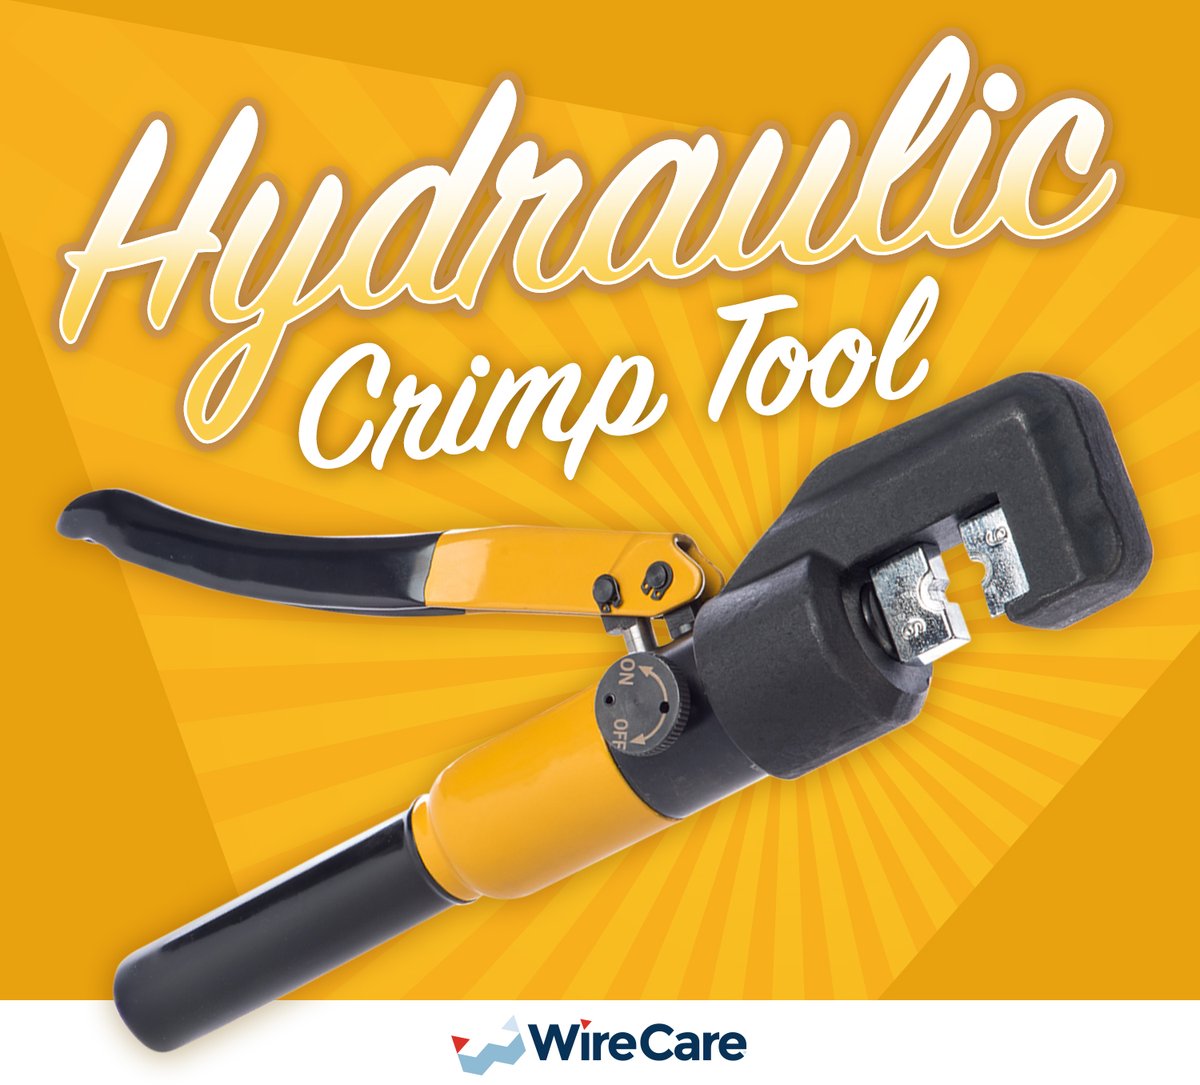 The TMS-10-YLK is a professional hydraulic crimping tool with interchangeable dies for copper, aluminum or other metals
 #WireCare #WireCrimping #WireCrimper #Tools #Wiring #Tools #HandTools